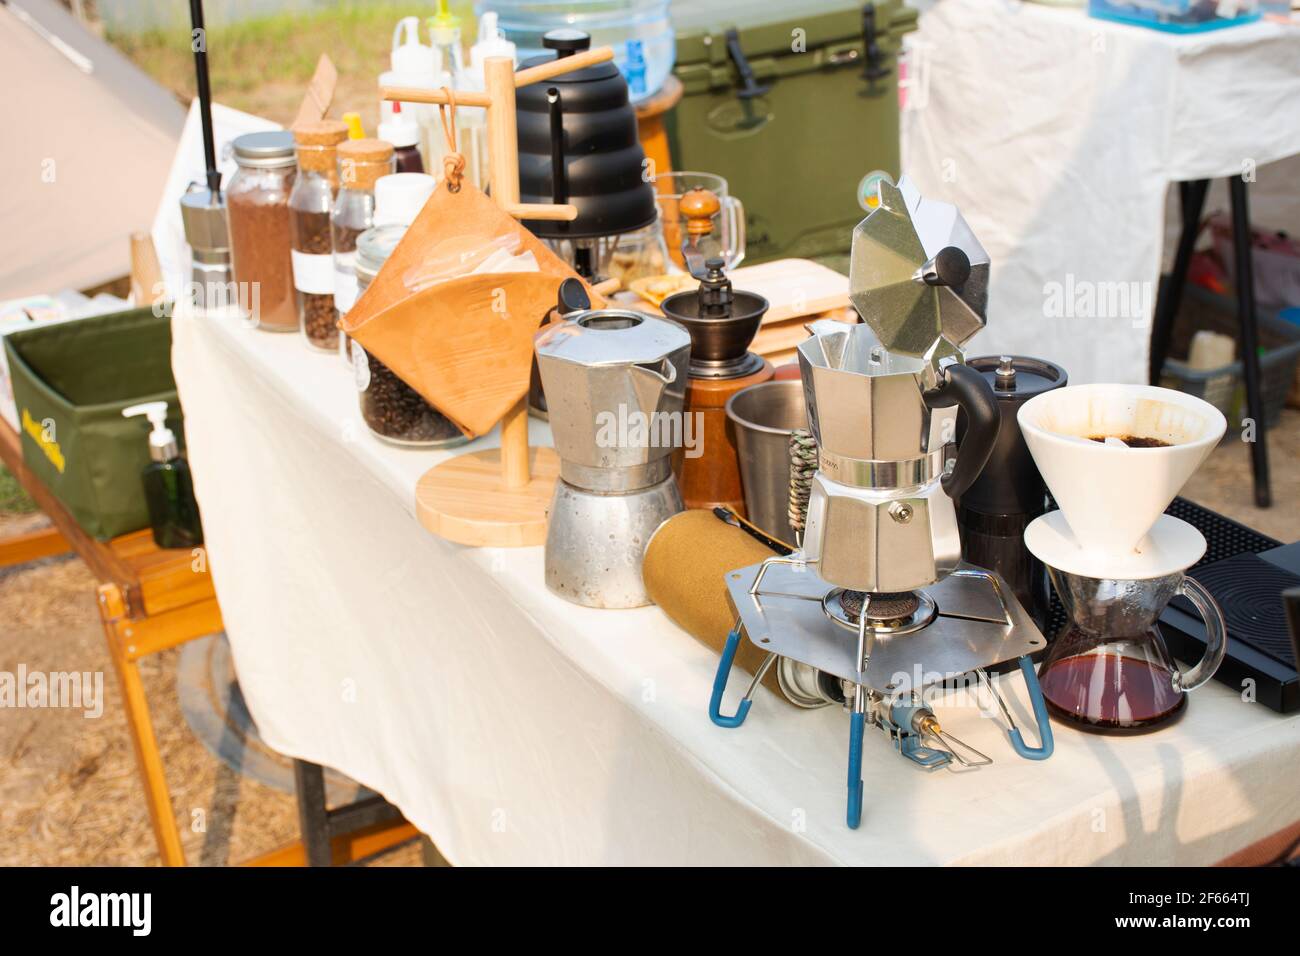 https://c8.alamy.com/comp/2F664TJ/tools-equipment-and-material-for-thai-men-barista-people-use-drip-coffee-maker-or-dripper-made-hot-and-iced-coffee-and-tea-for-sale-at-outdoor-of-cafe-2F664TJ.jpg